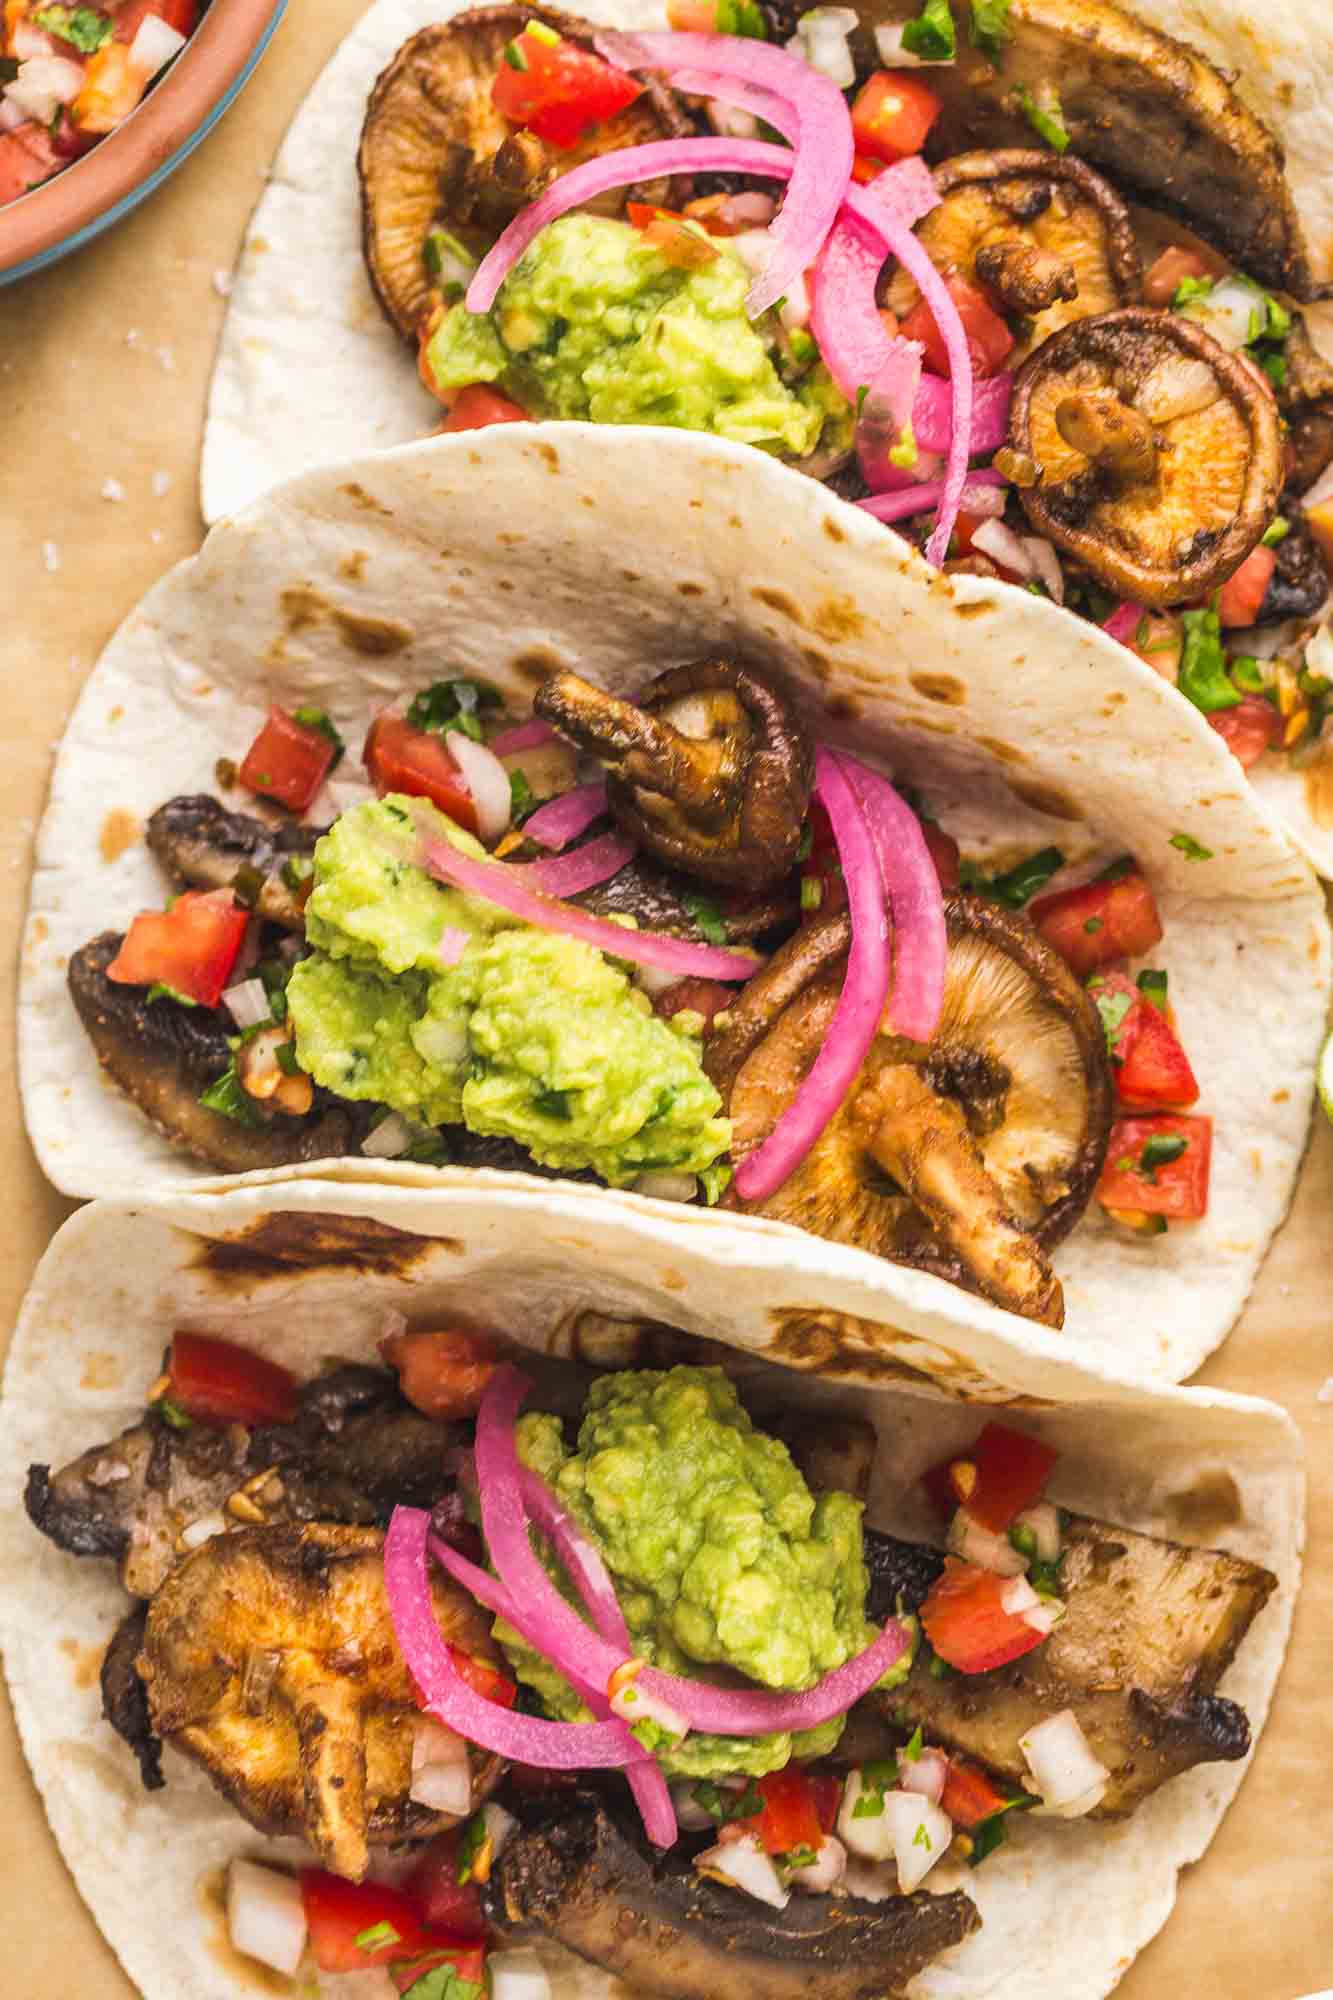 3 mushroom tacos with guacamole and quick pickled onions